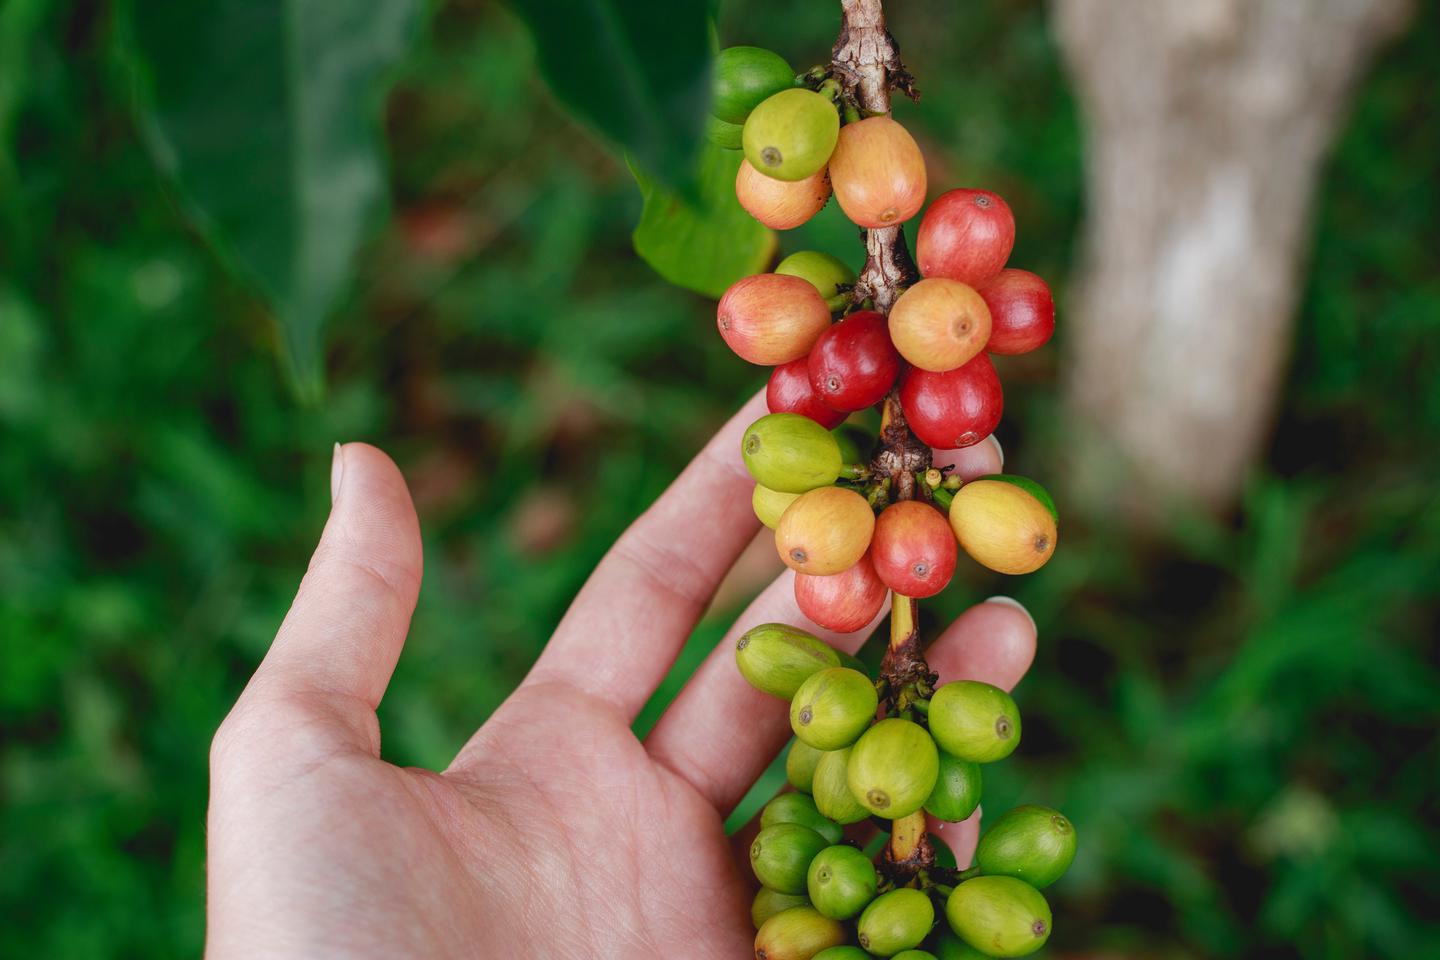 Hand holding a branch with kona coffee